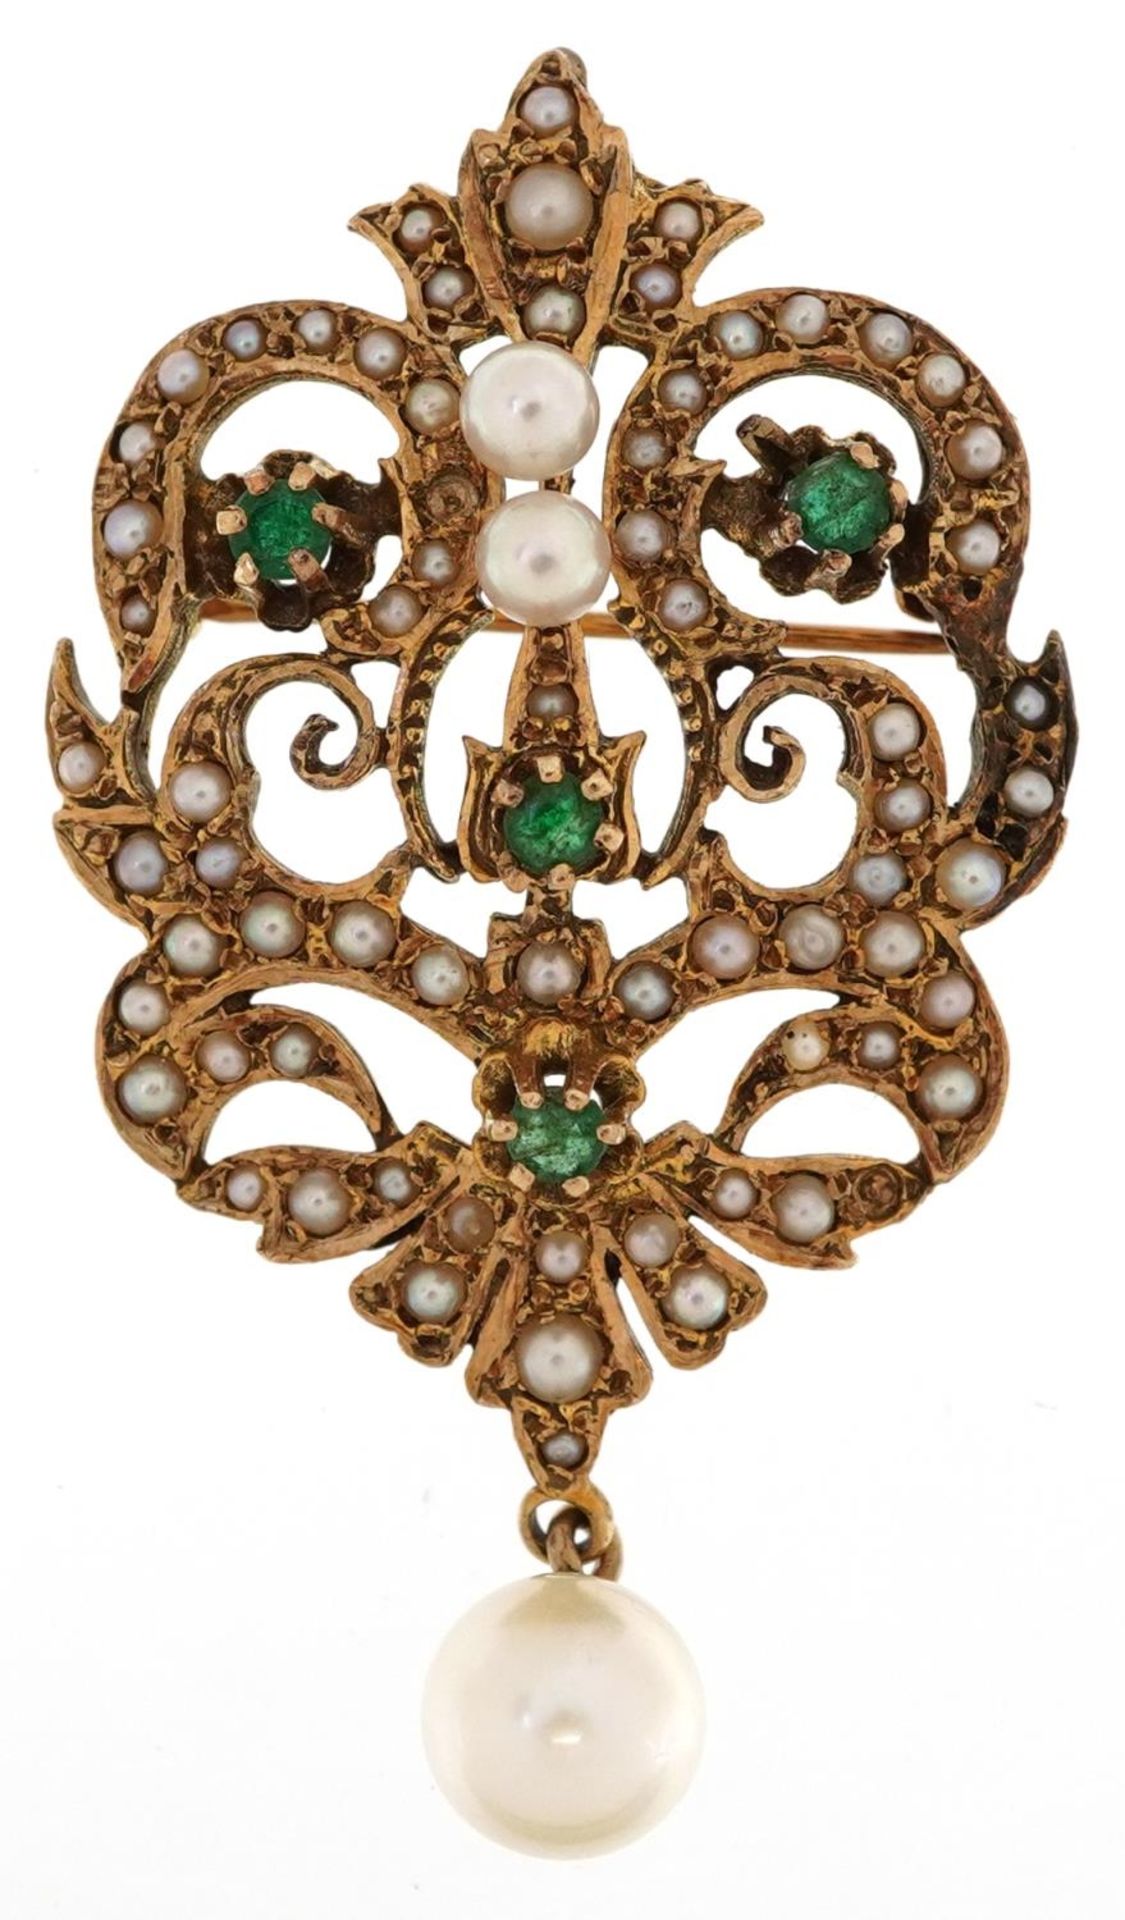 Antique European 14K gold Belle Epoque emerald, seed pearl and cultured pearl pendant brooch, 5cm